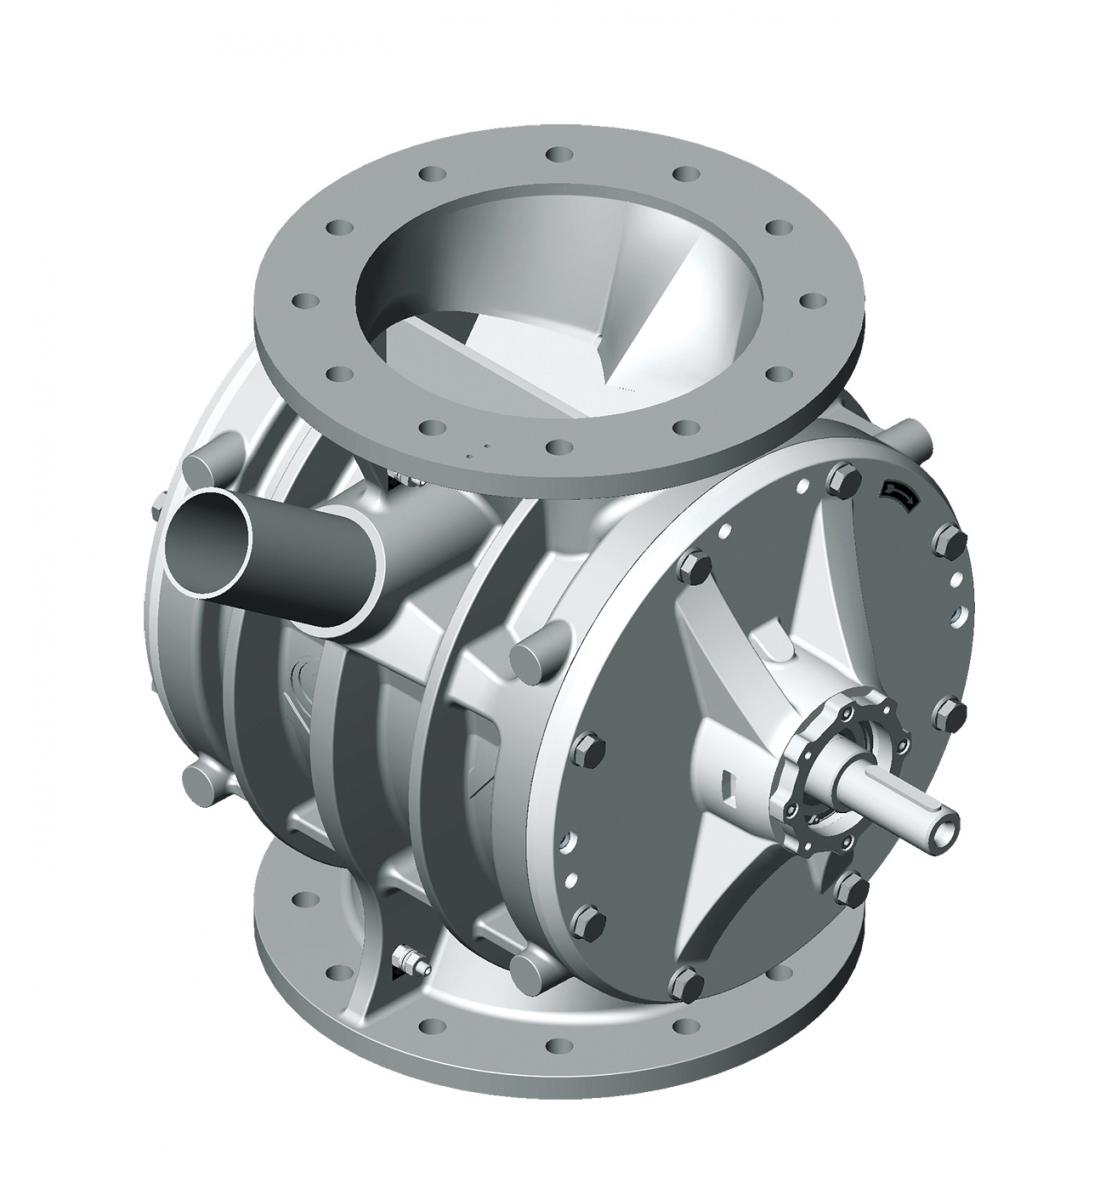 Coperion's ZVB rotary valve is a stainless steel rotary valve